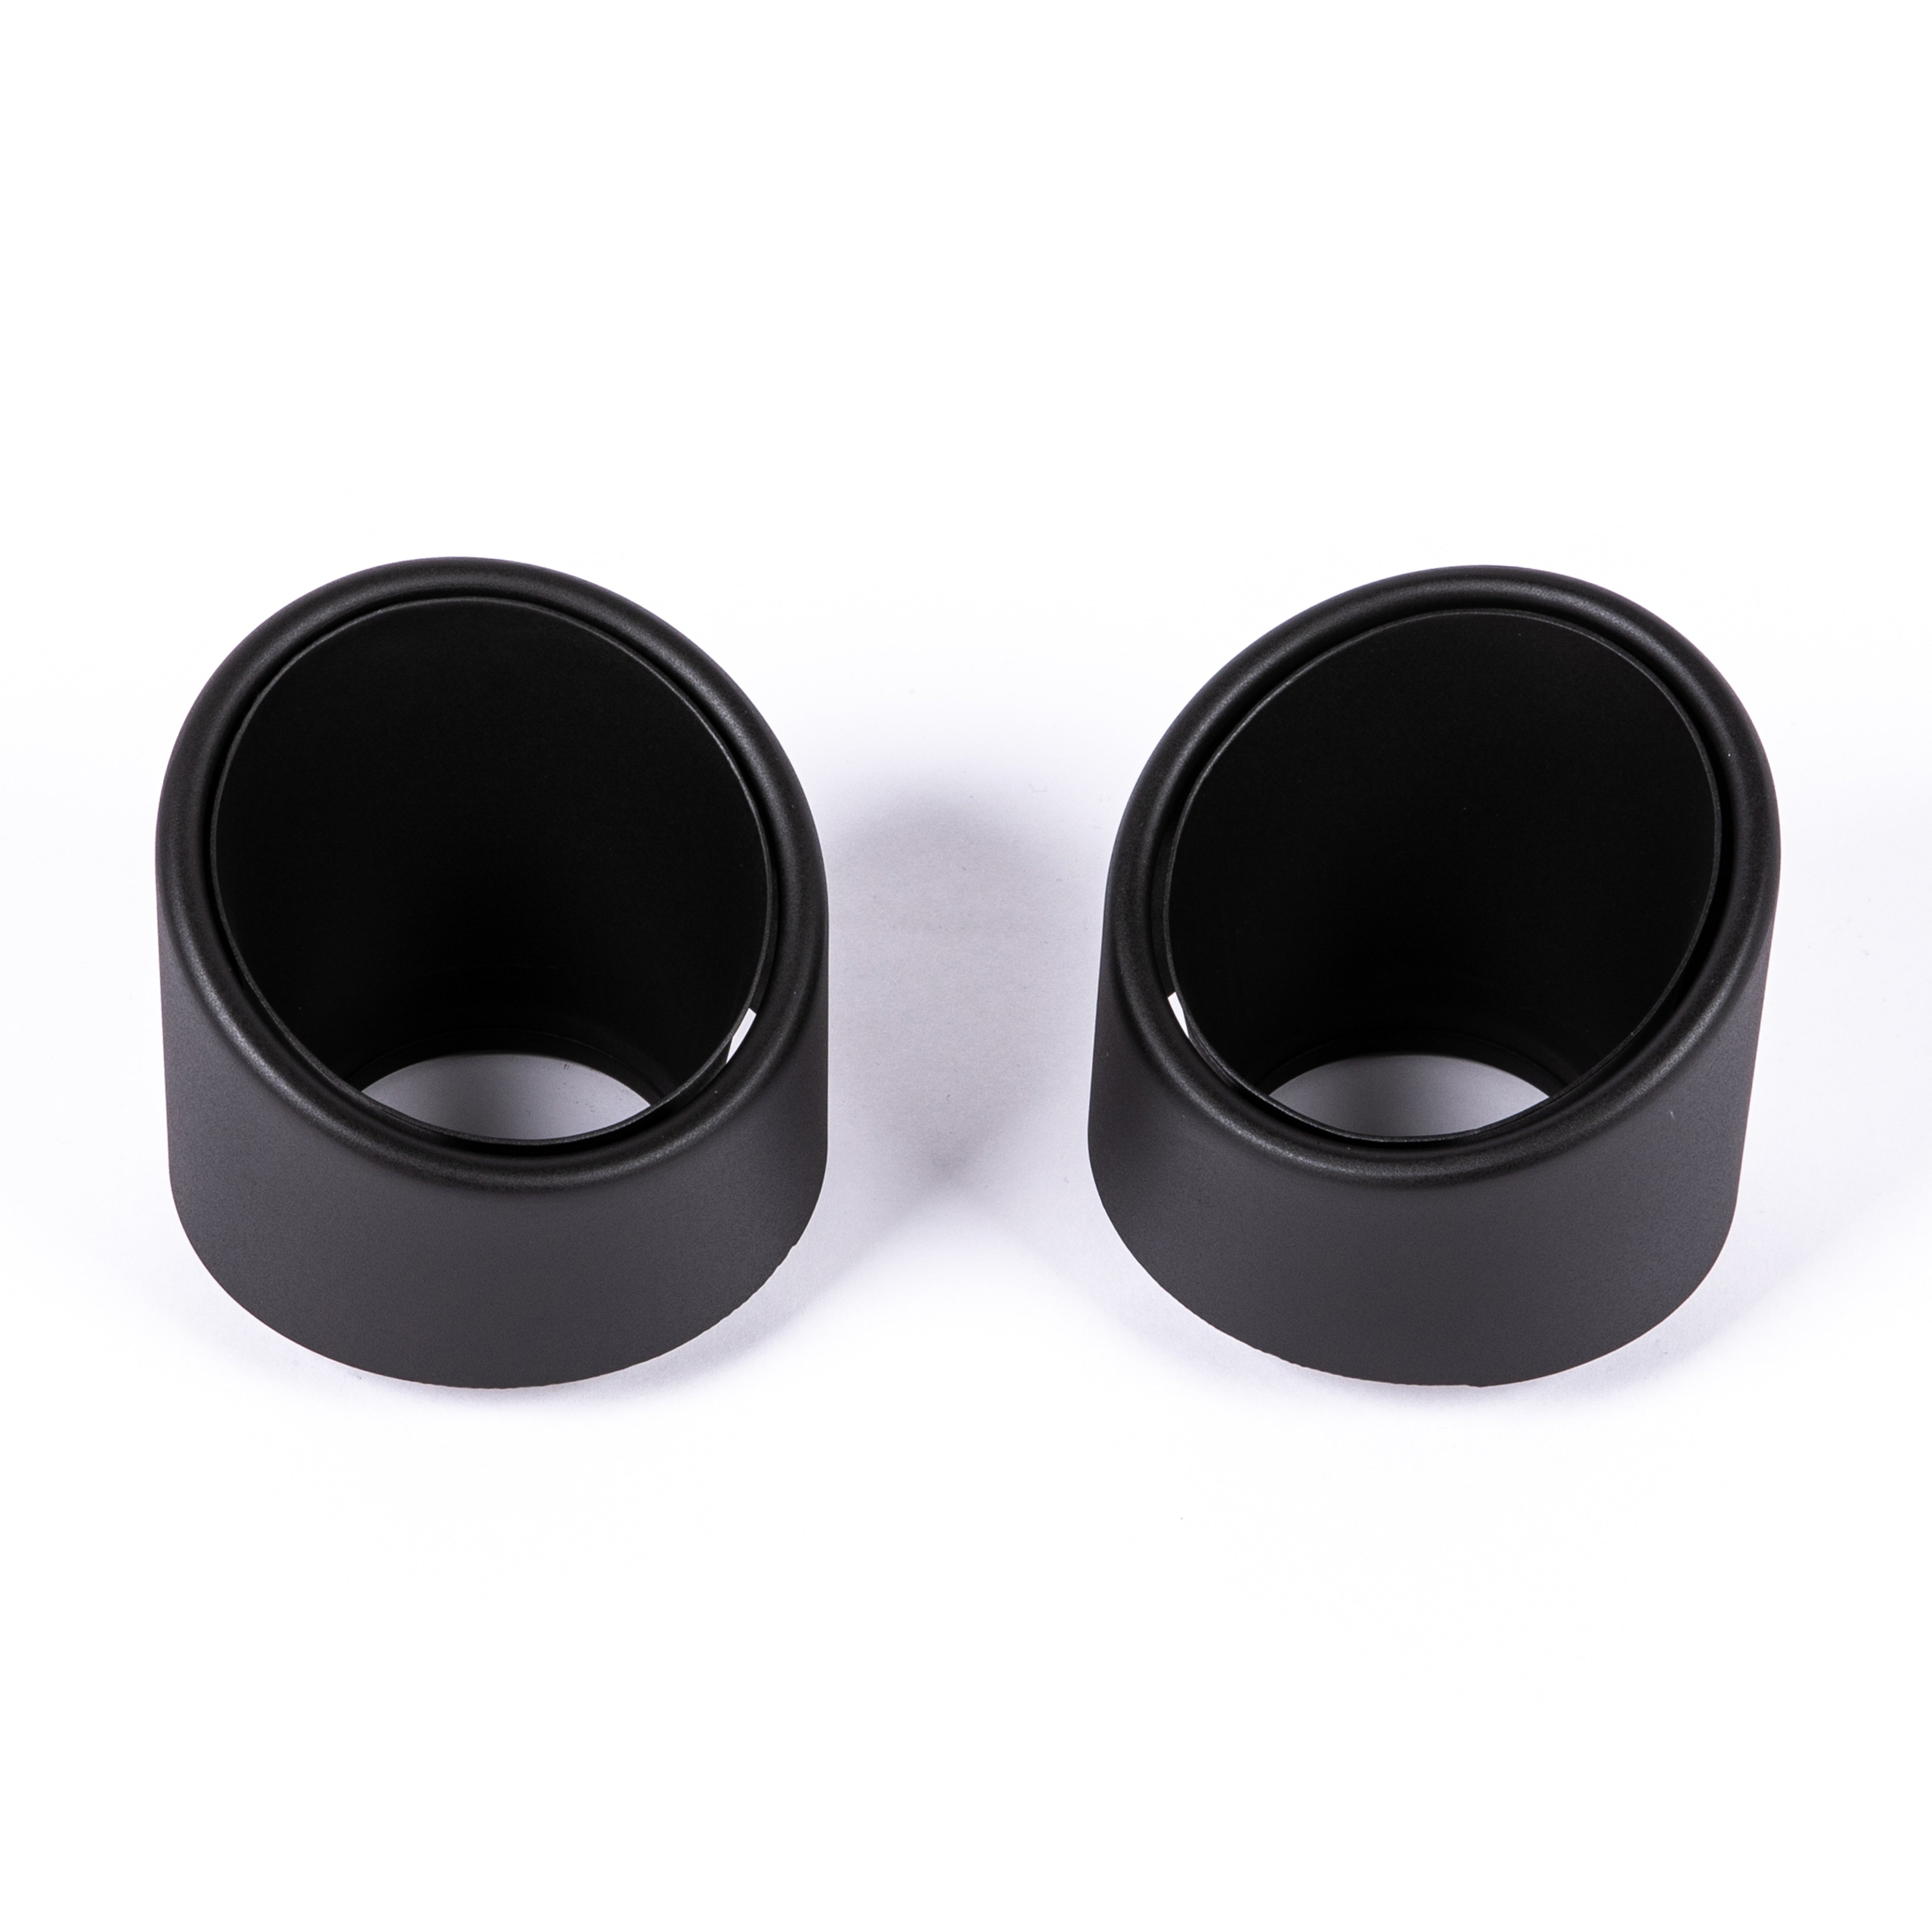 INCONEL ROLLED TIPS (BLACK COATED)